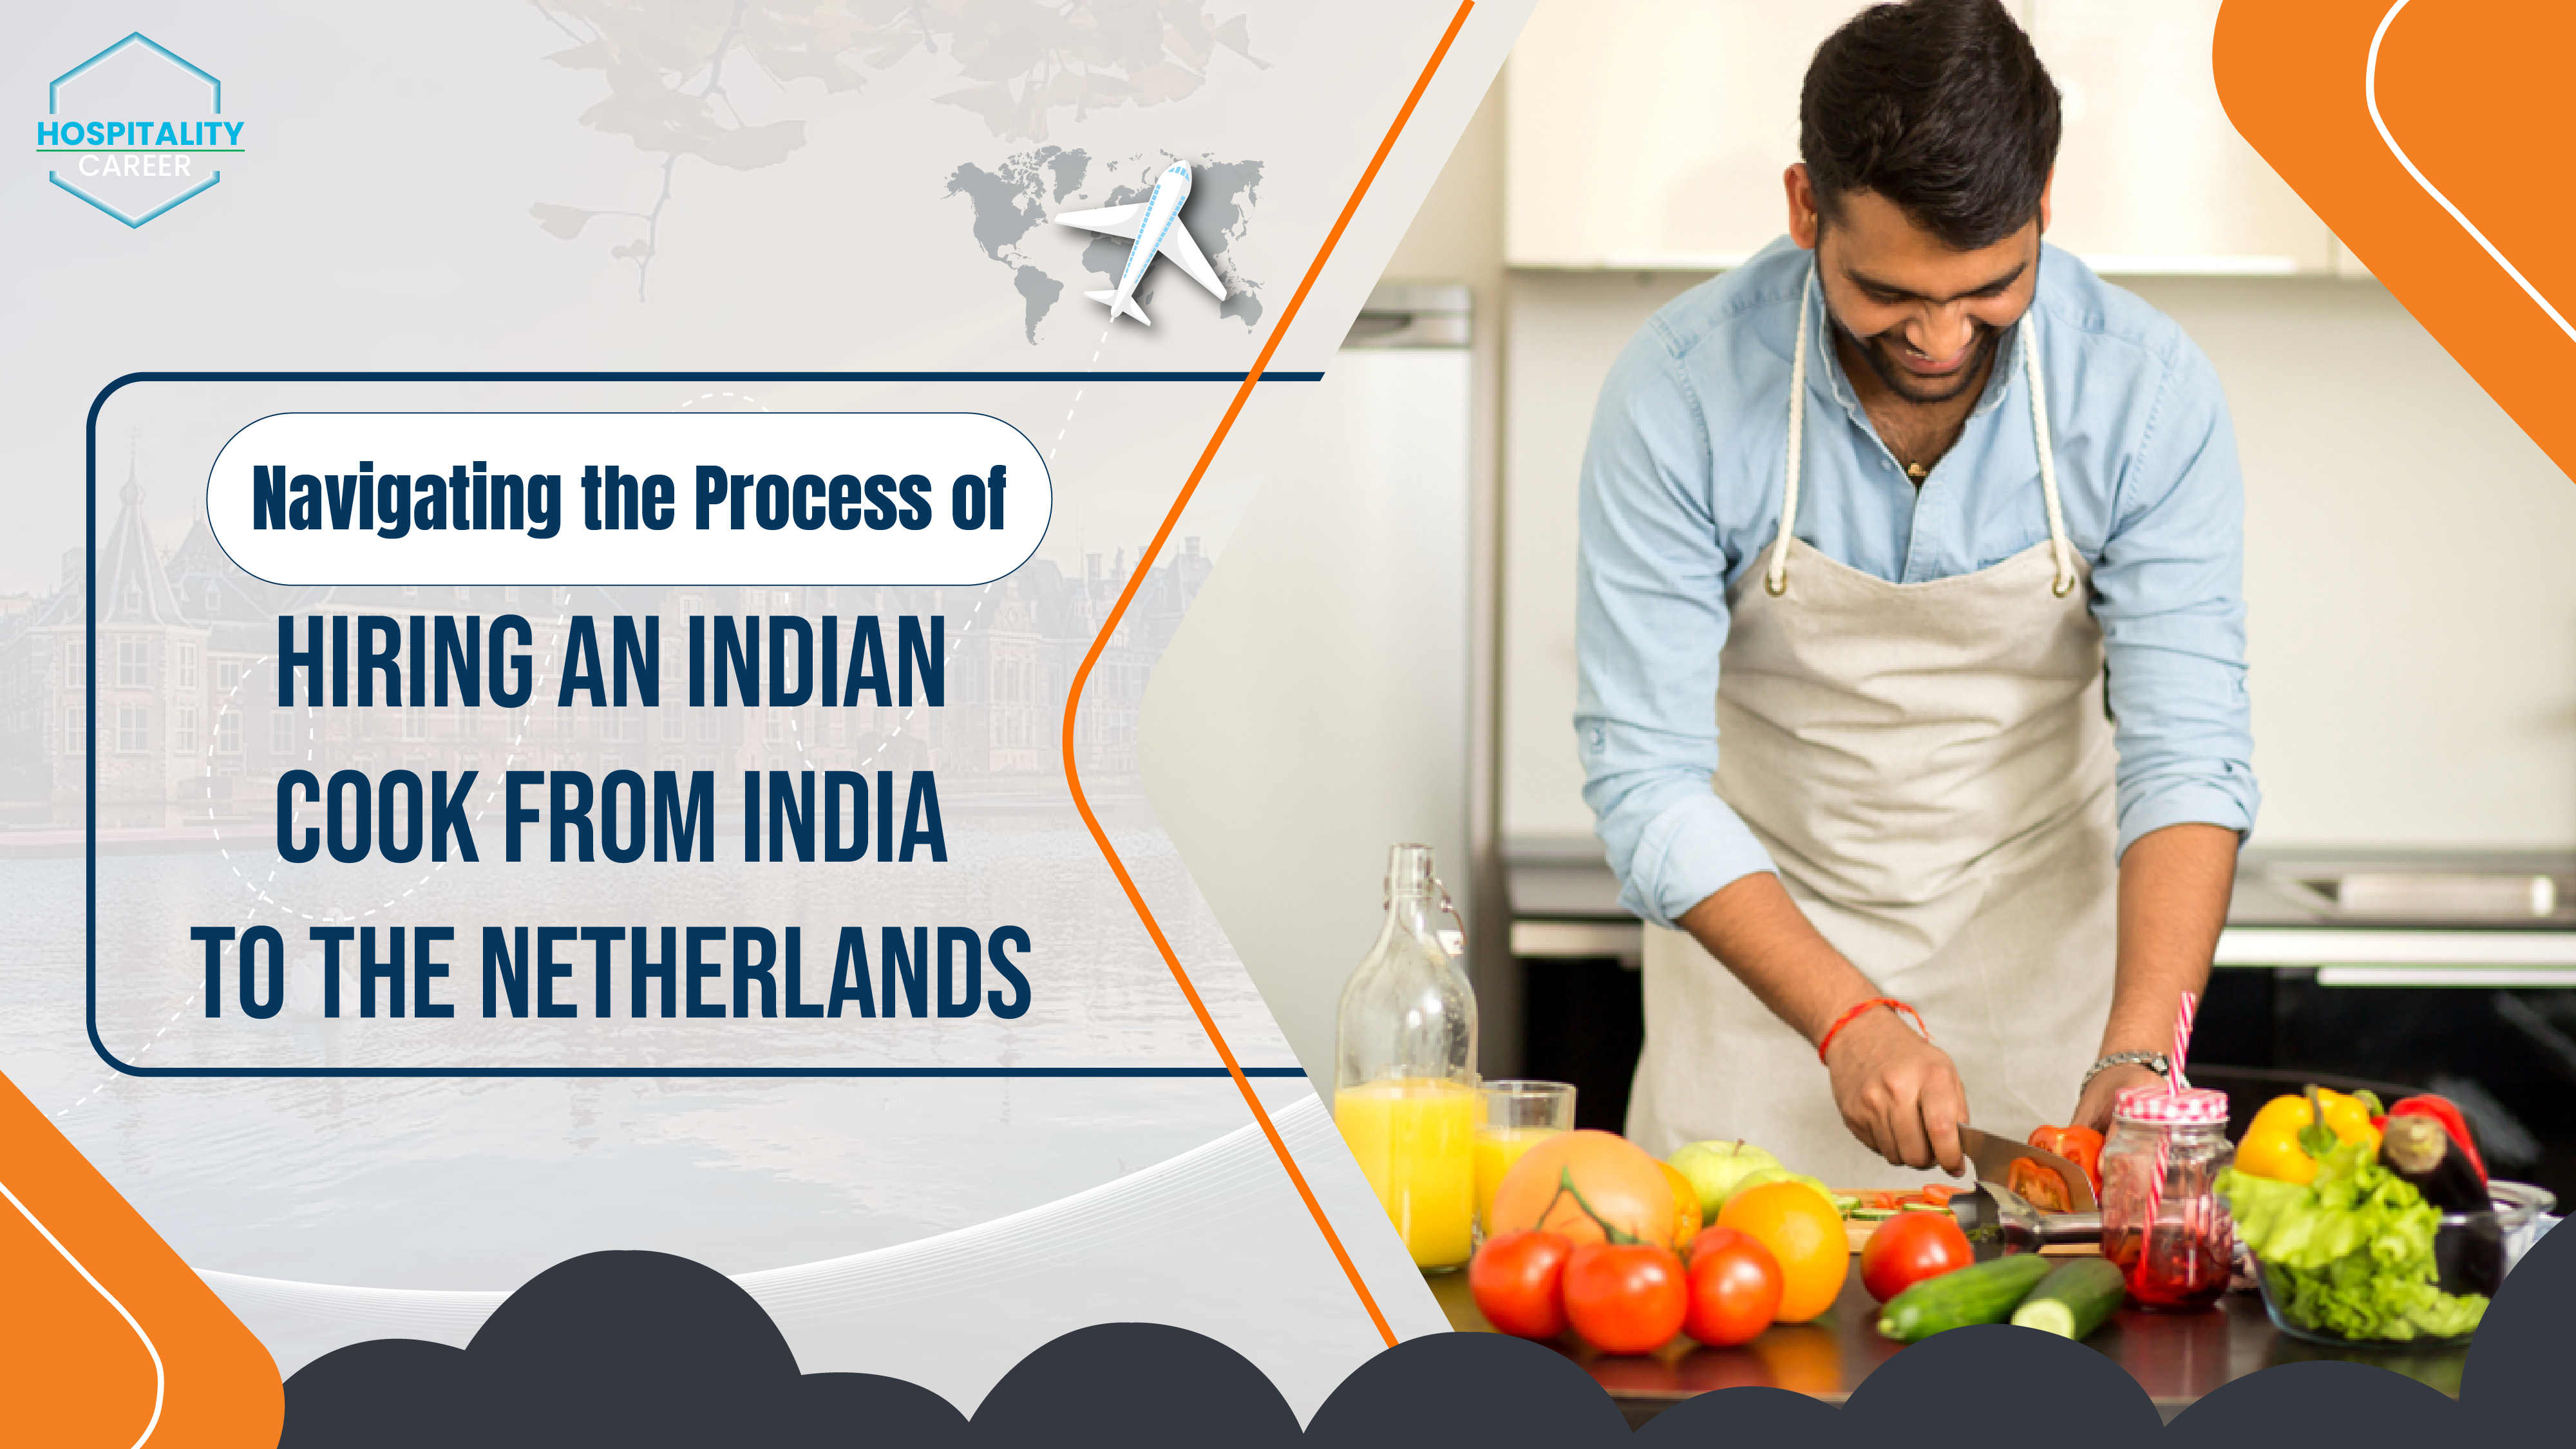 Process of Hiring an Indian Cook from India to the Netherlands